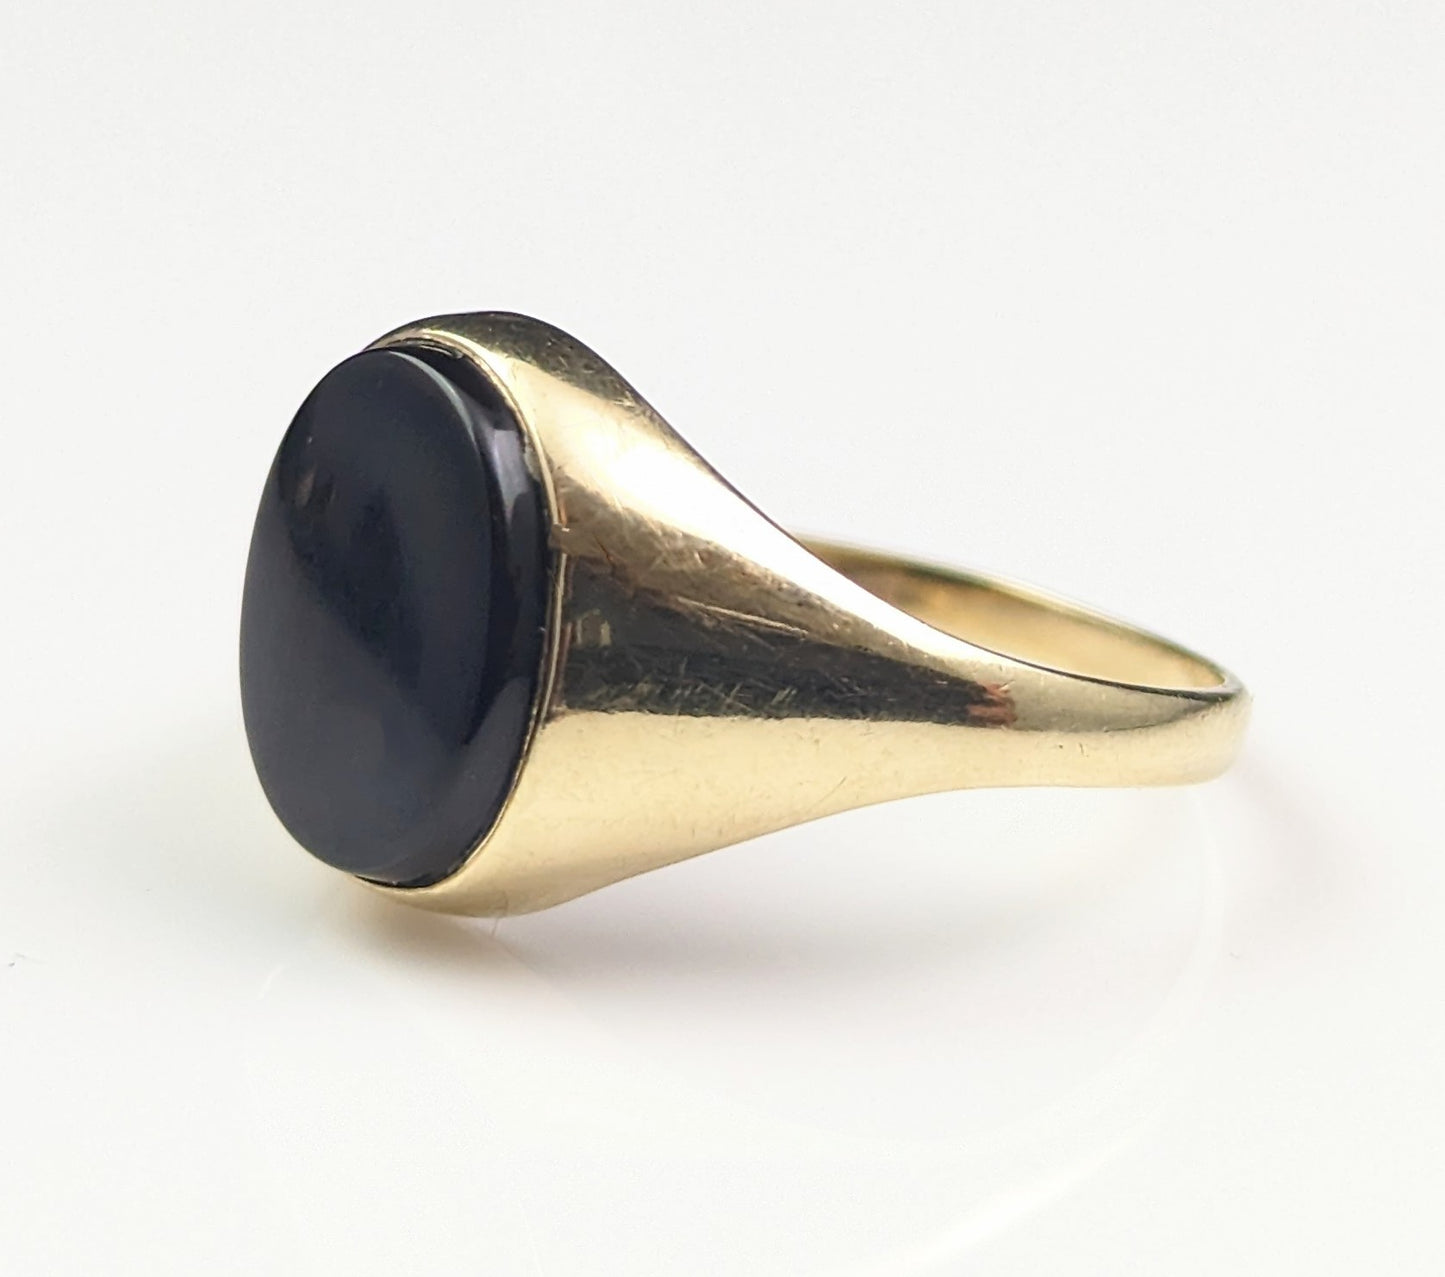 Vintage Onyx signet ring, 9ct yellow gold, pinky ring